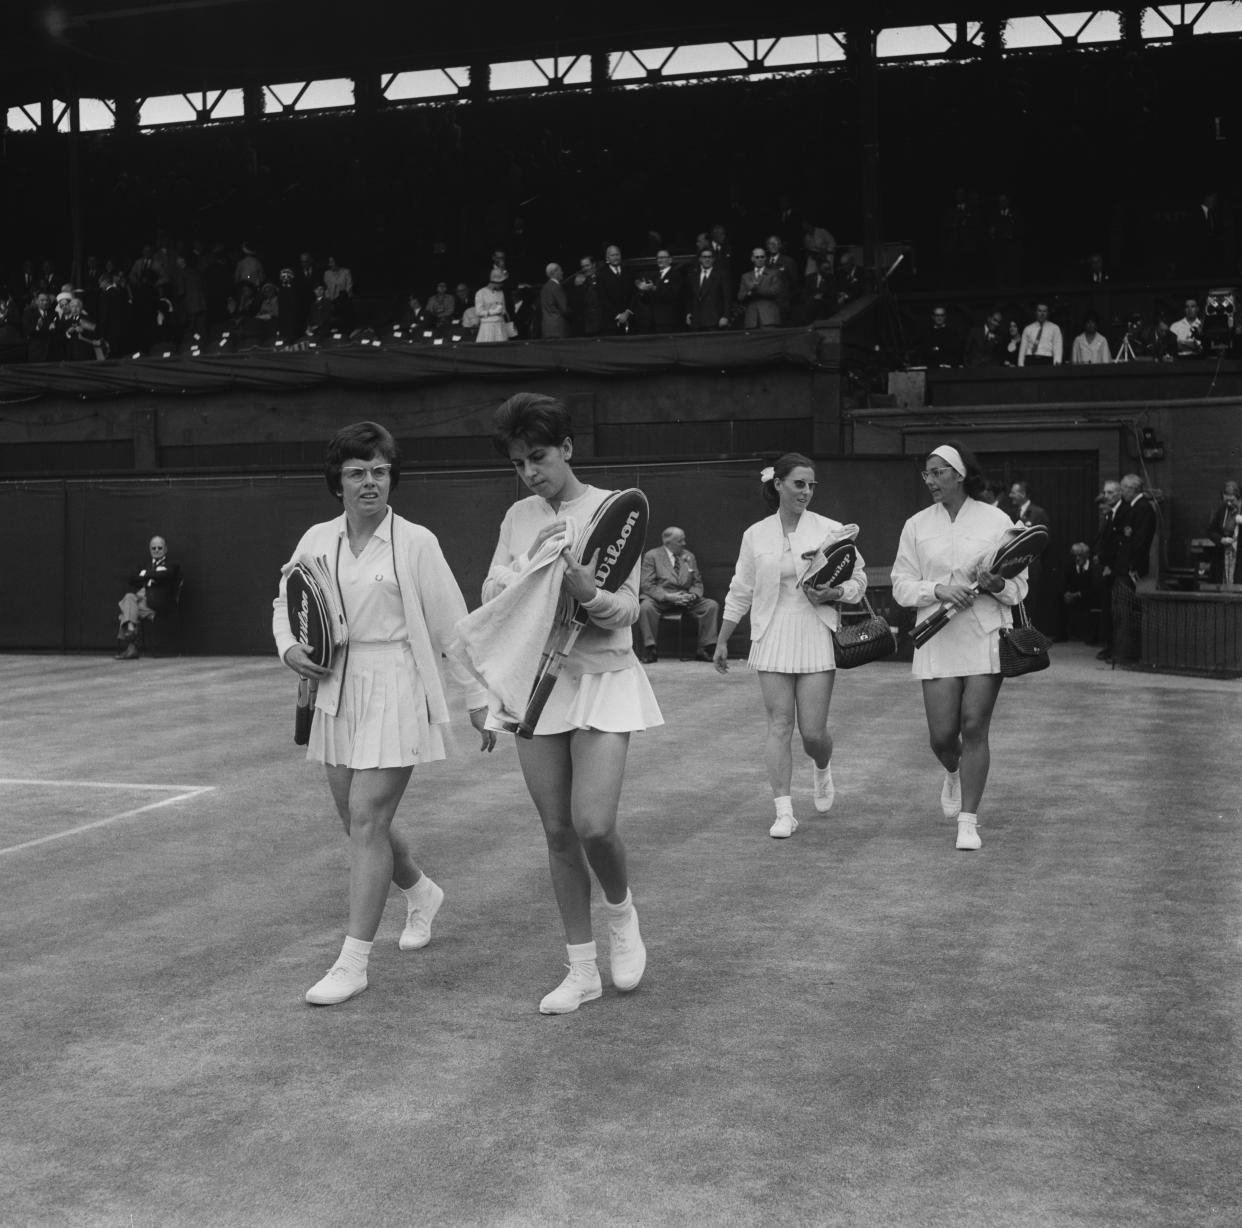 The finalists in the Ladies’ Doubles walk onto the Centre Court at Wimbledon, London, July 3, 1965. From left: Billie Jean Moffitt (later Billie Jean King) of the U.S., Maria Bueno of Brazil, and Françoise Dürr and Janine Lieffrig of France. - Credit: Keystone/Hulton Archive/Getty Images